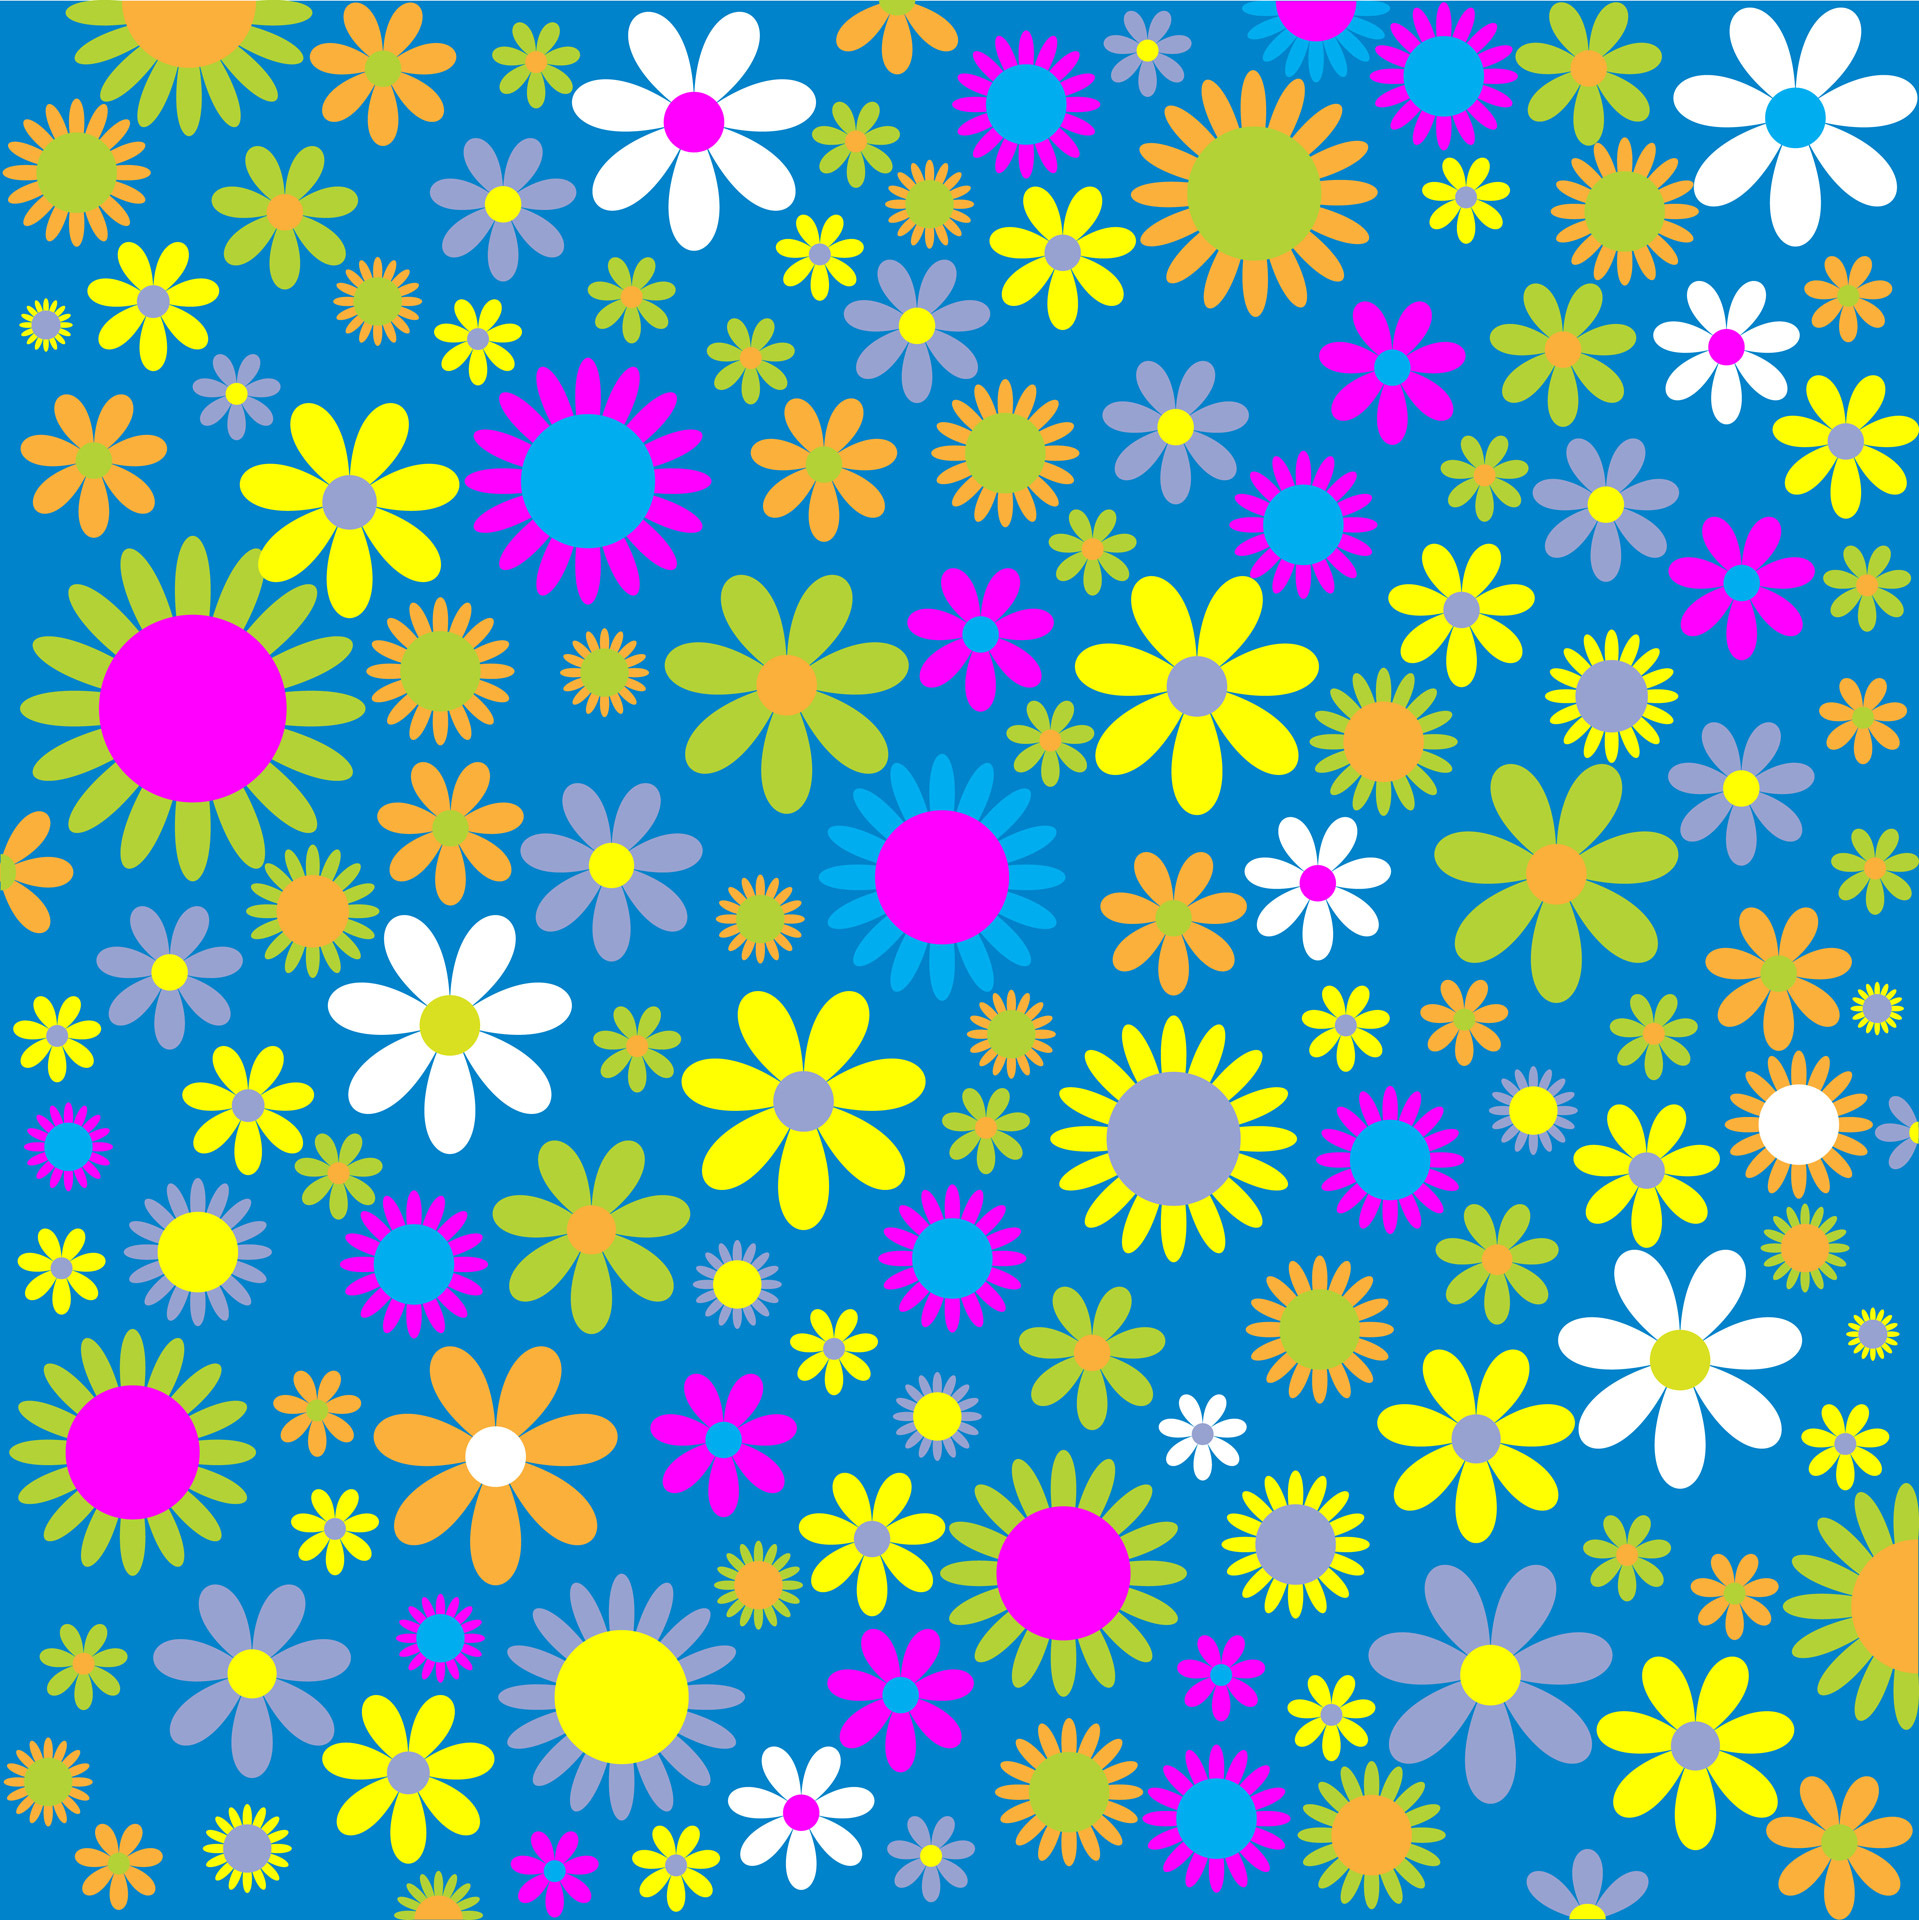 Colorful background of floral flowers wallpaper for scrapbooking